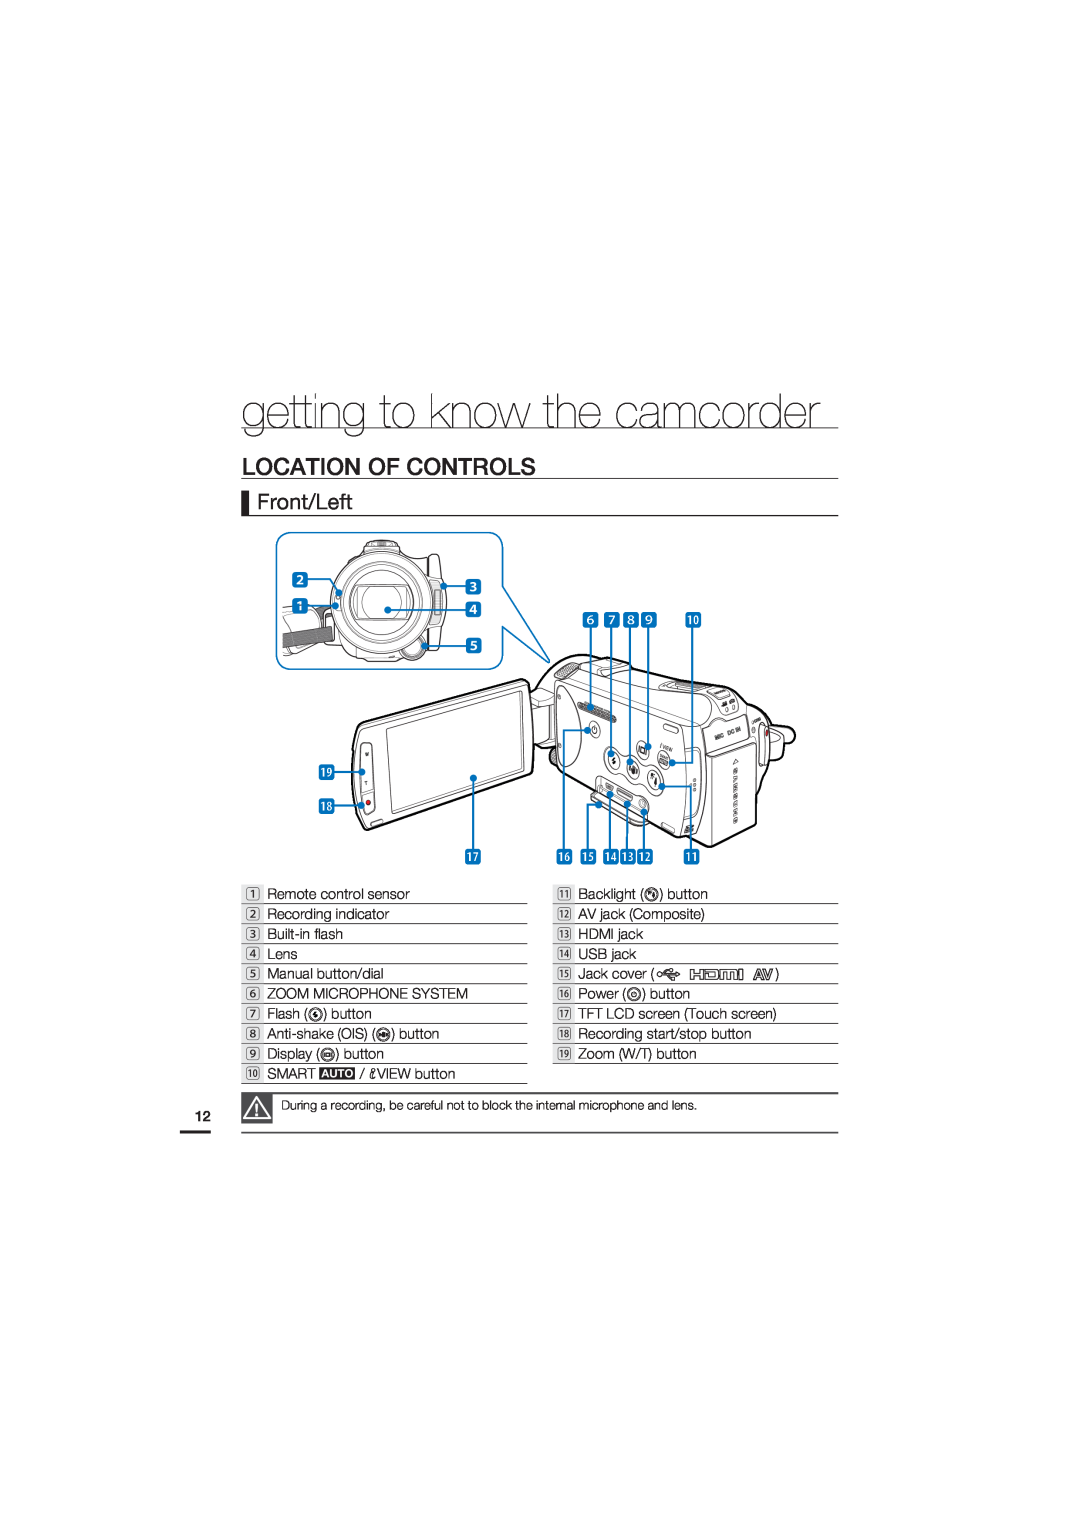 Samsung HMX-S15BN/XAA, HMX-S10BN/XAA manual getting to know the camcorder, Location Of Controls, Front/Left, 6 7 89 